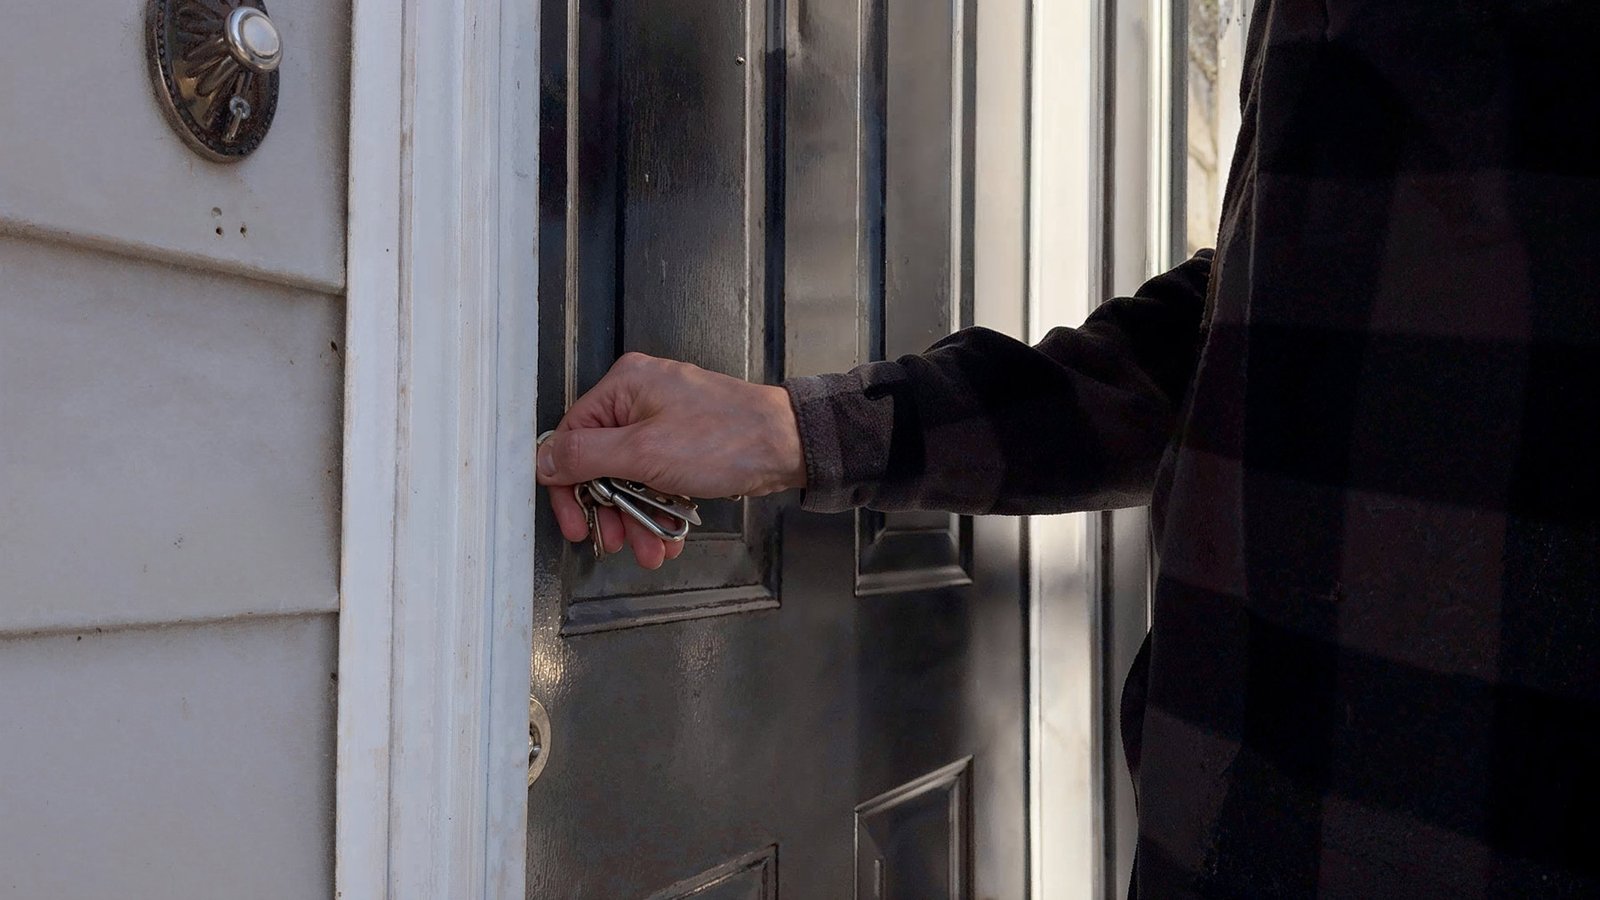 Close-up of a person's hand in a plaid jacket holding keys to unlock a house door, with a focus on security and home access.